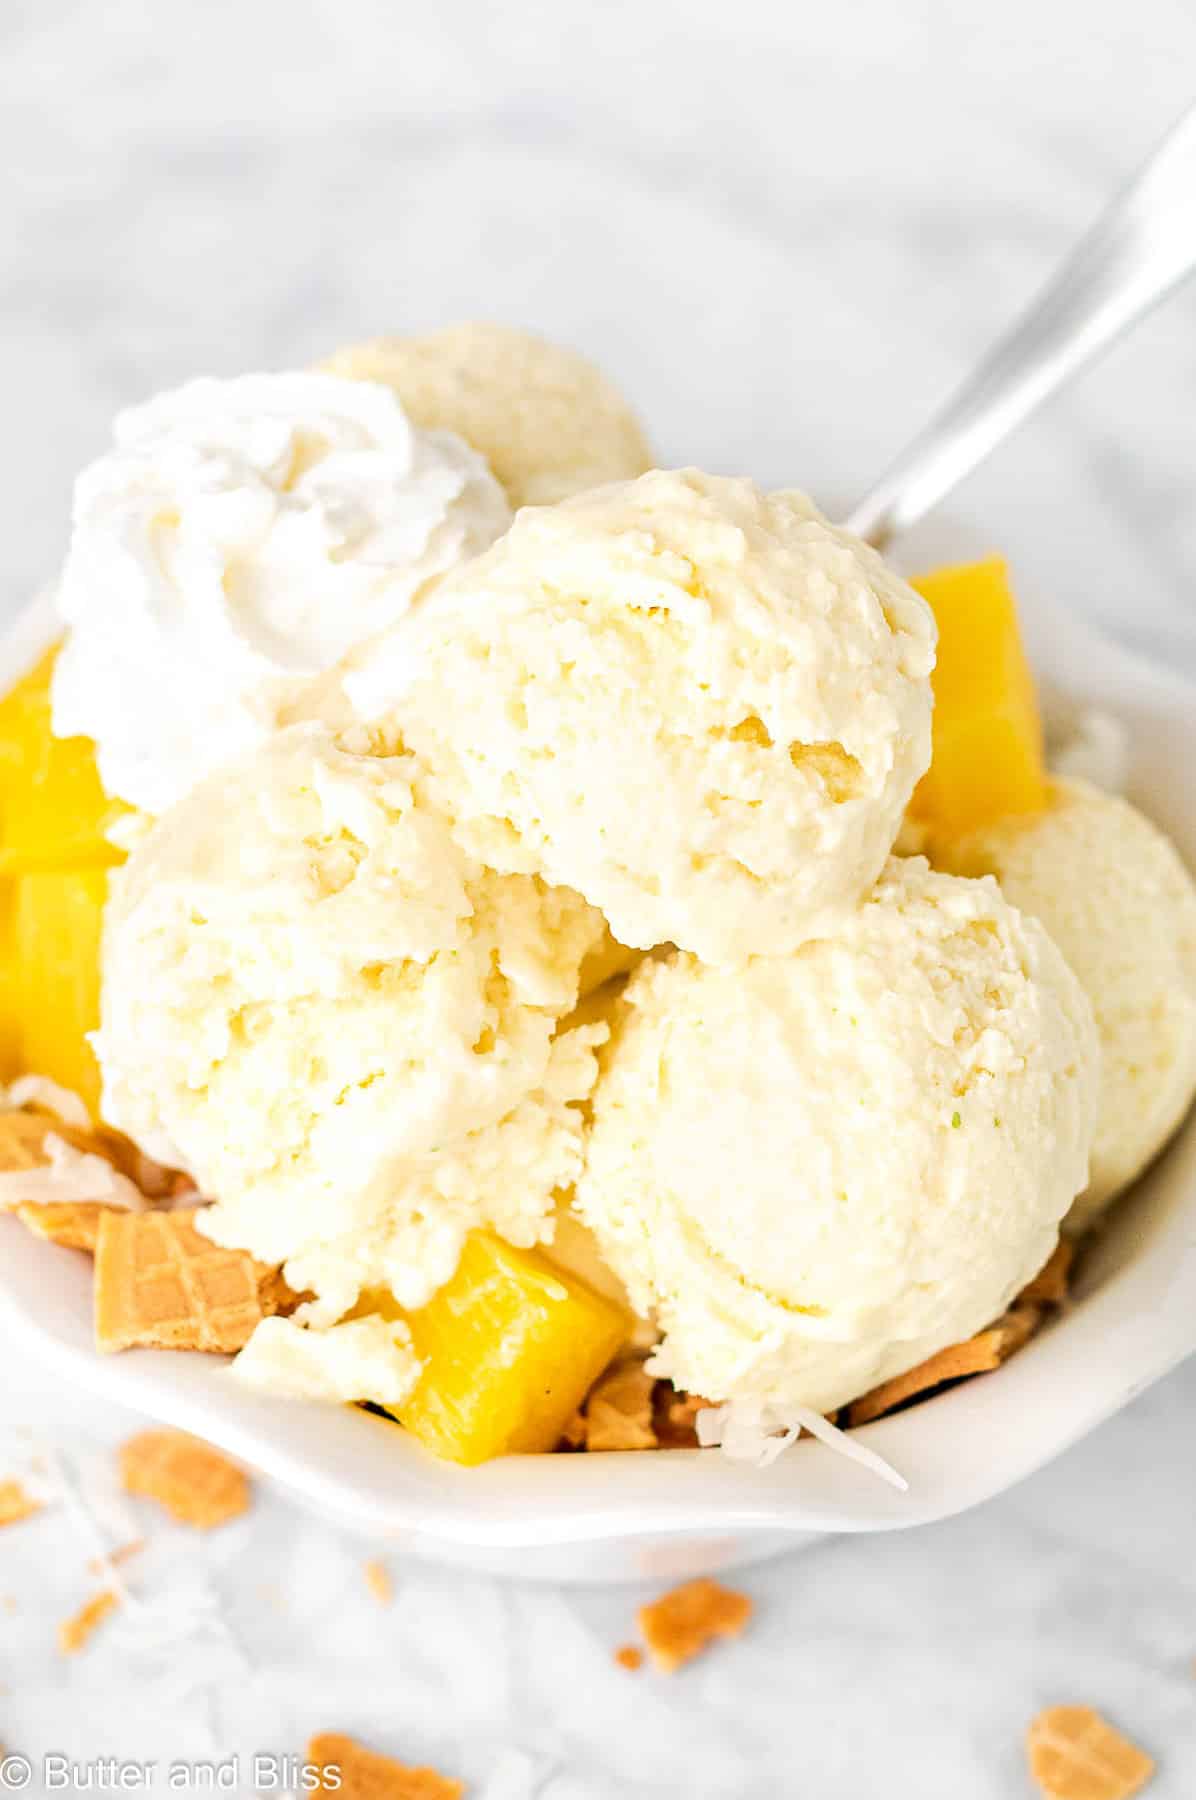 Pina colada ice cream sundae with fresh fruit and whipped cream in a white bowl.